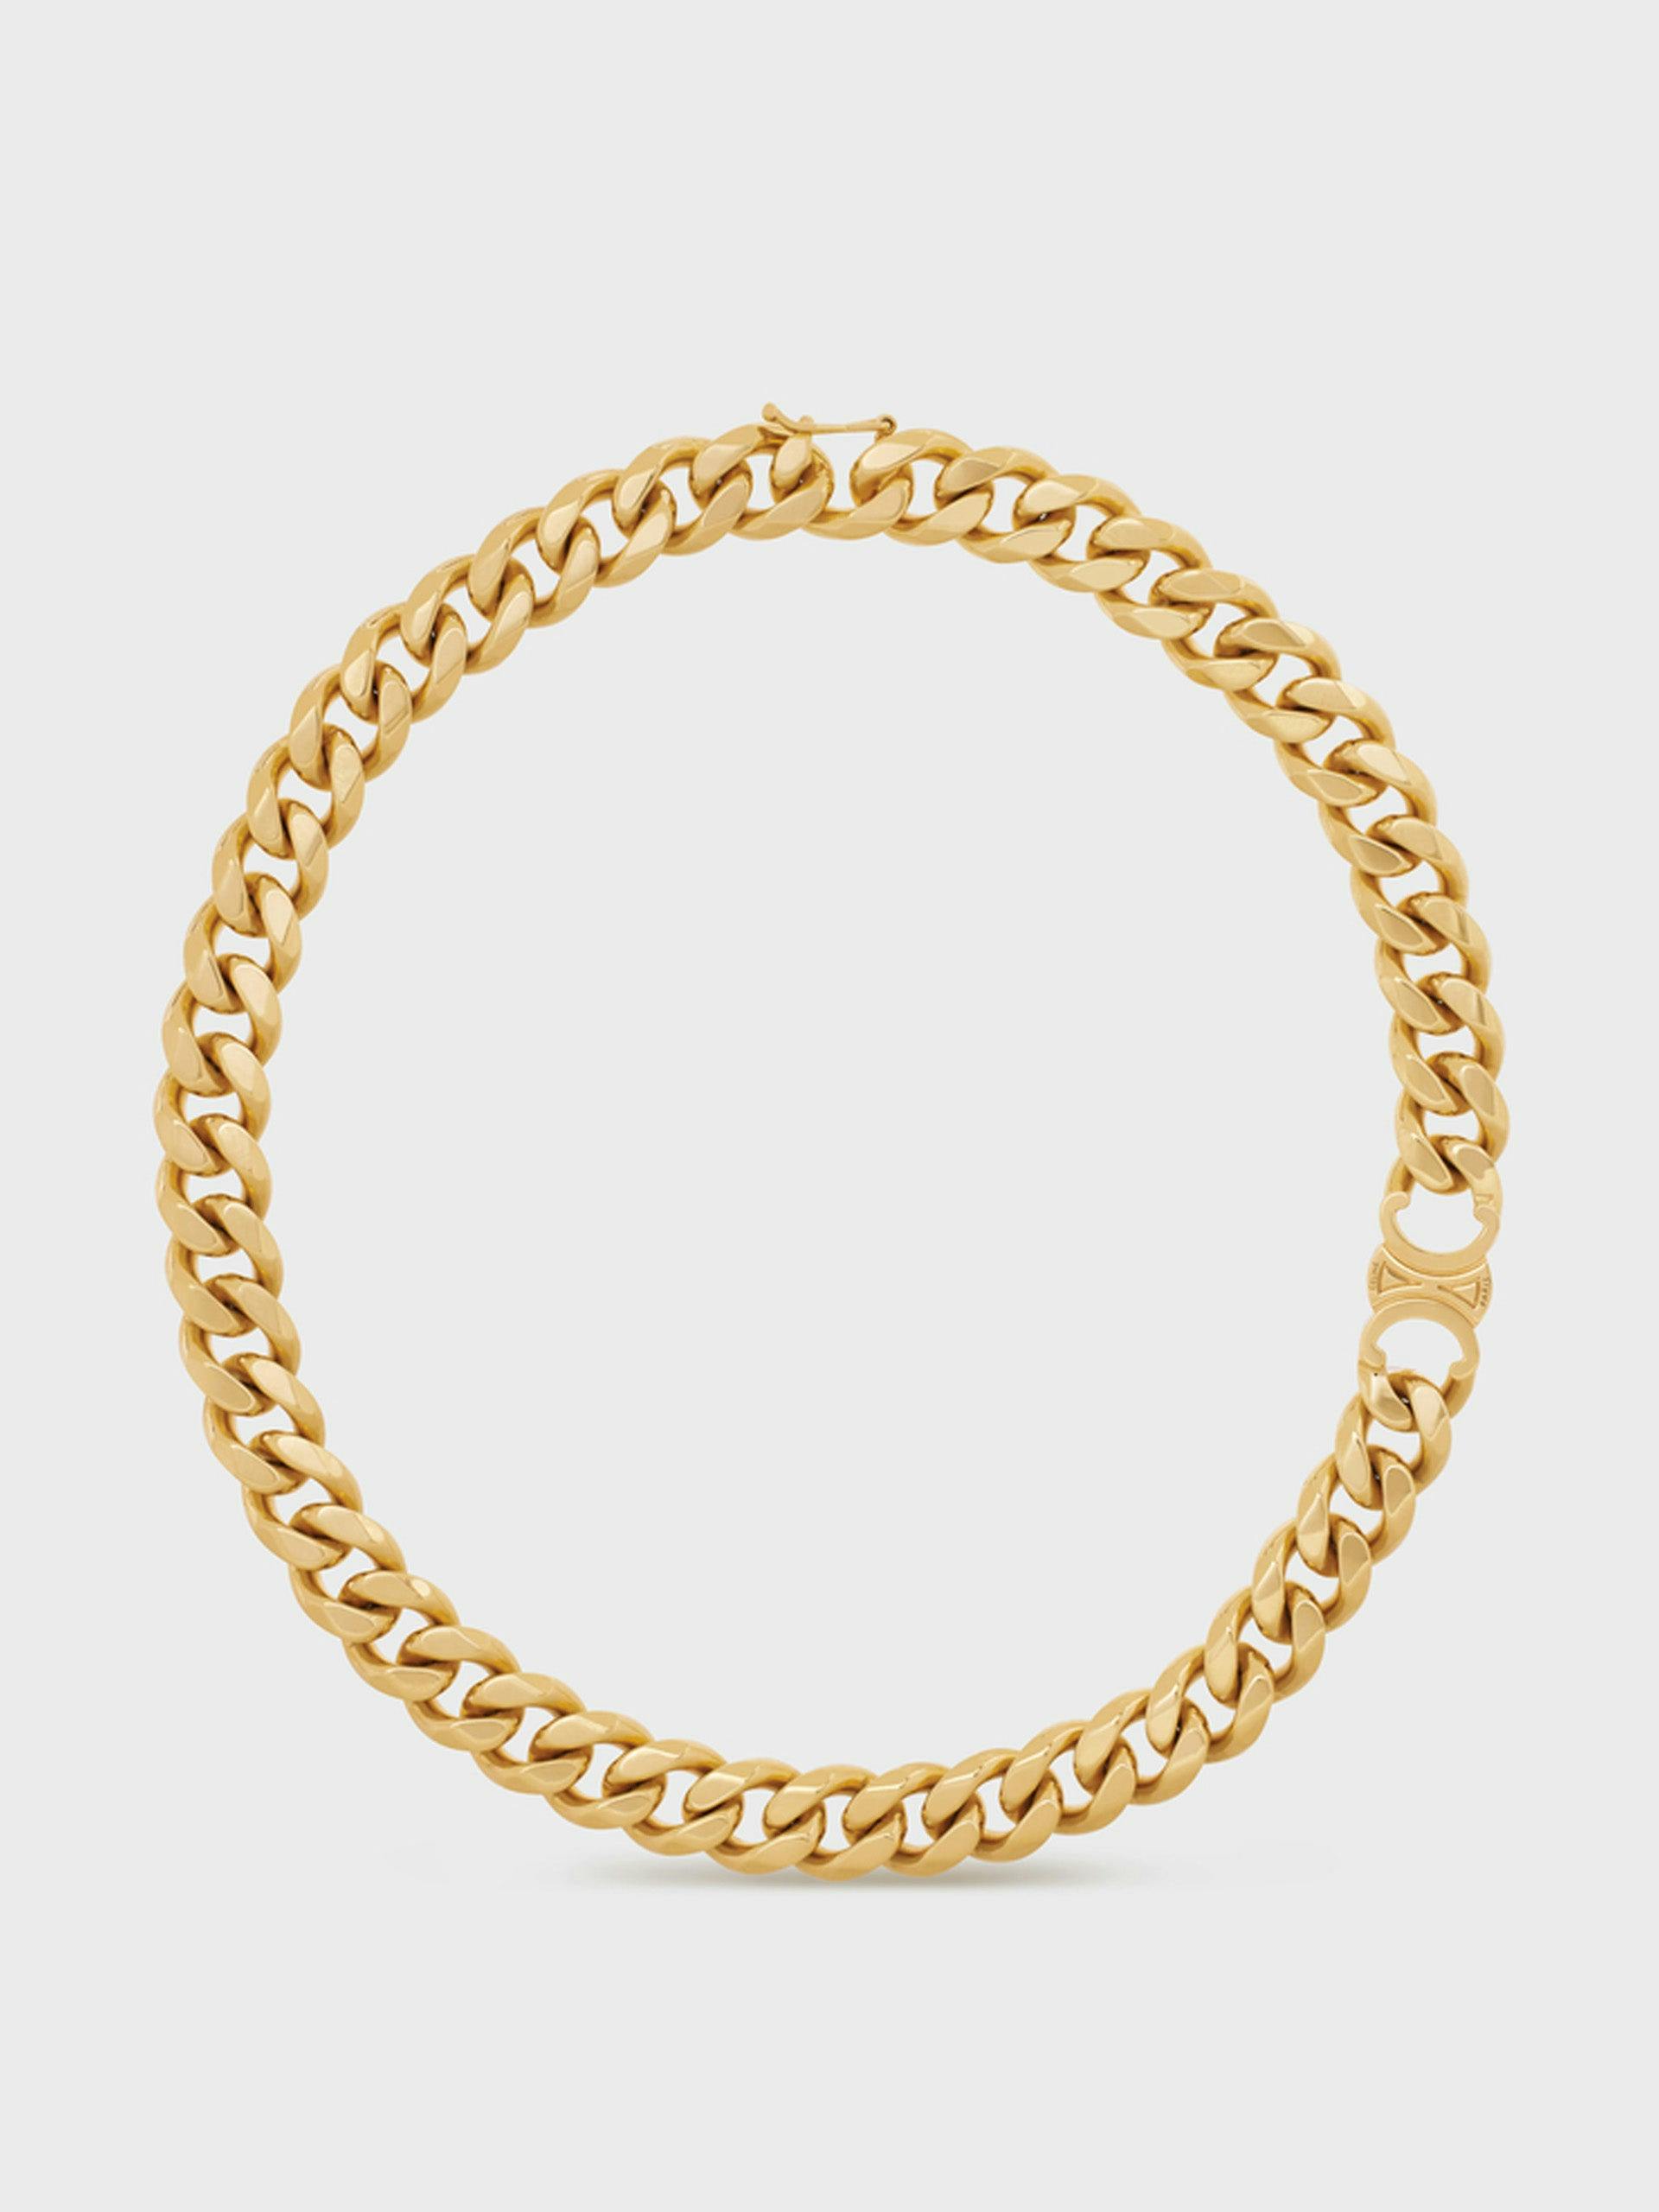 Brass chain necklace with gold finish